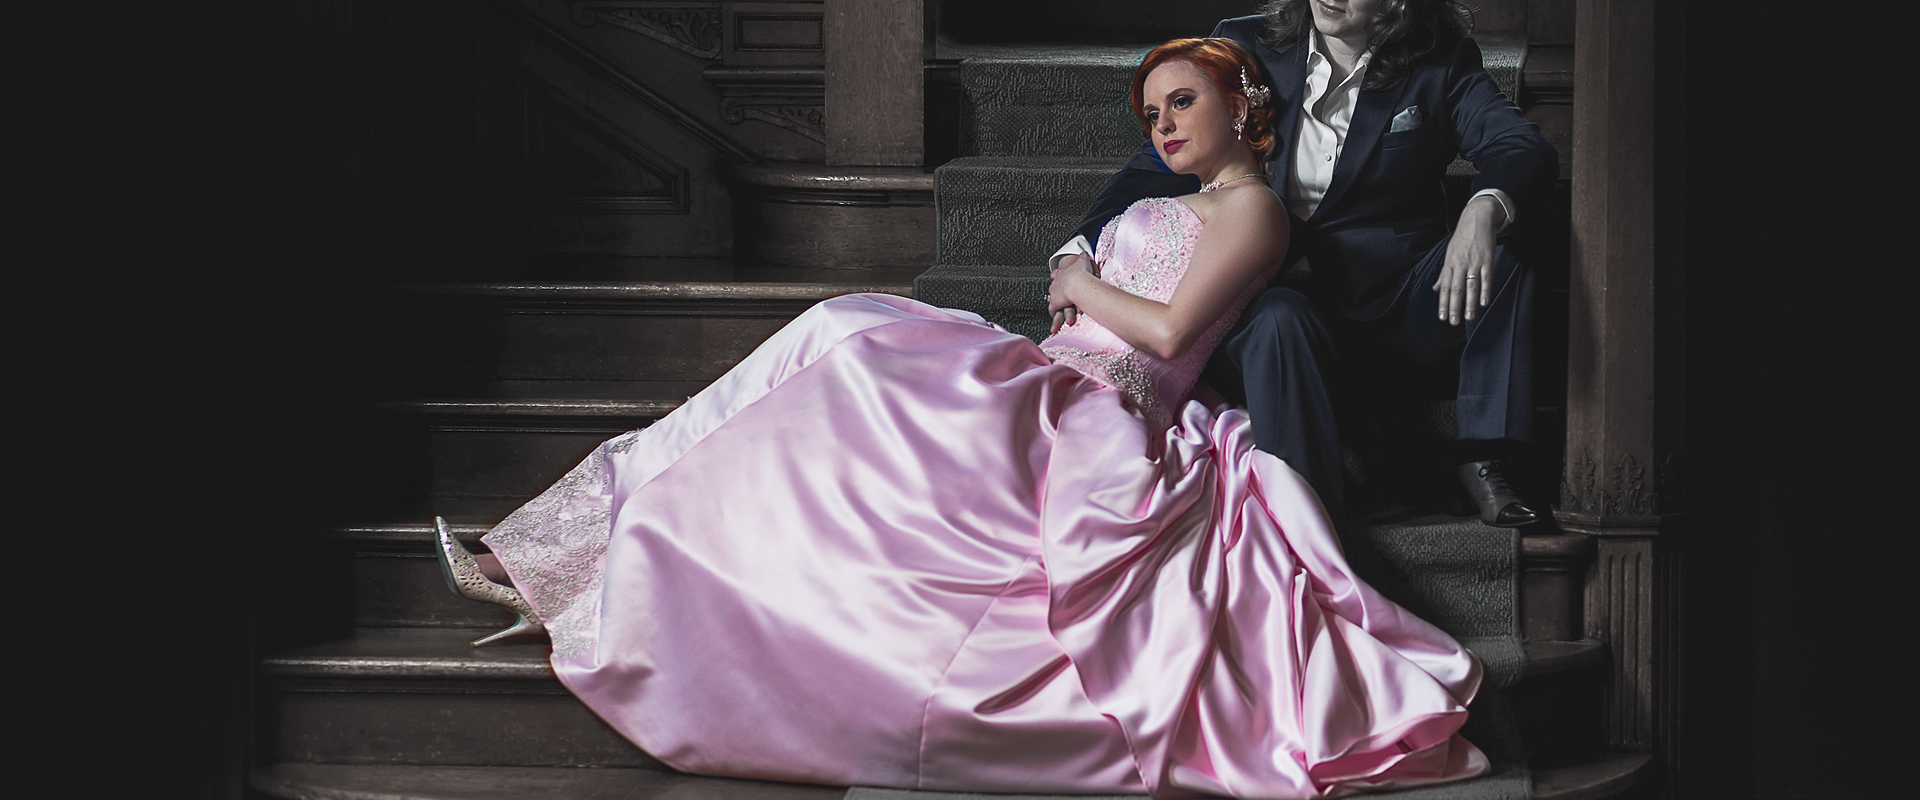 Bride in pink couture gown by Vanyanis. Photography © 4Walls